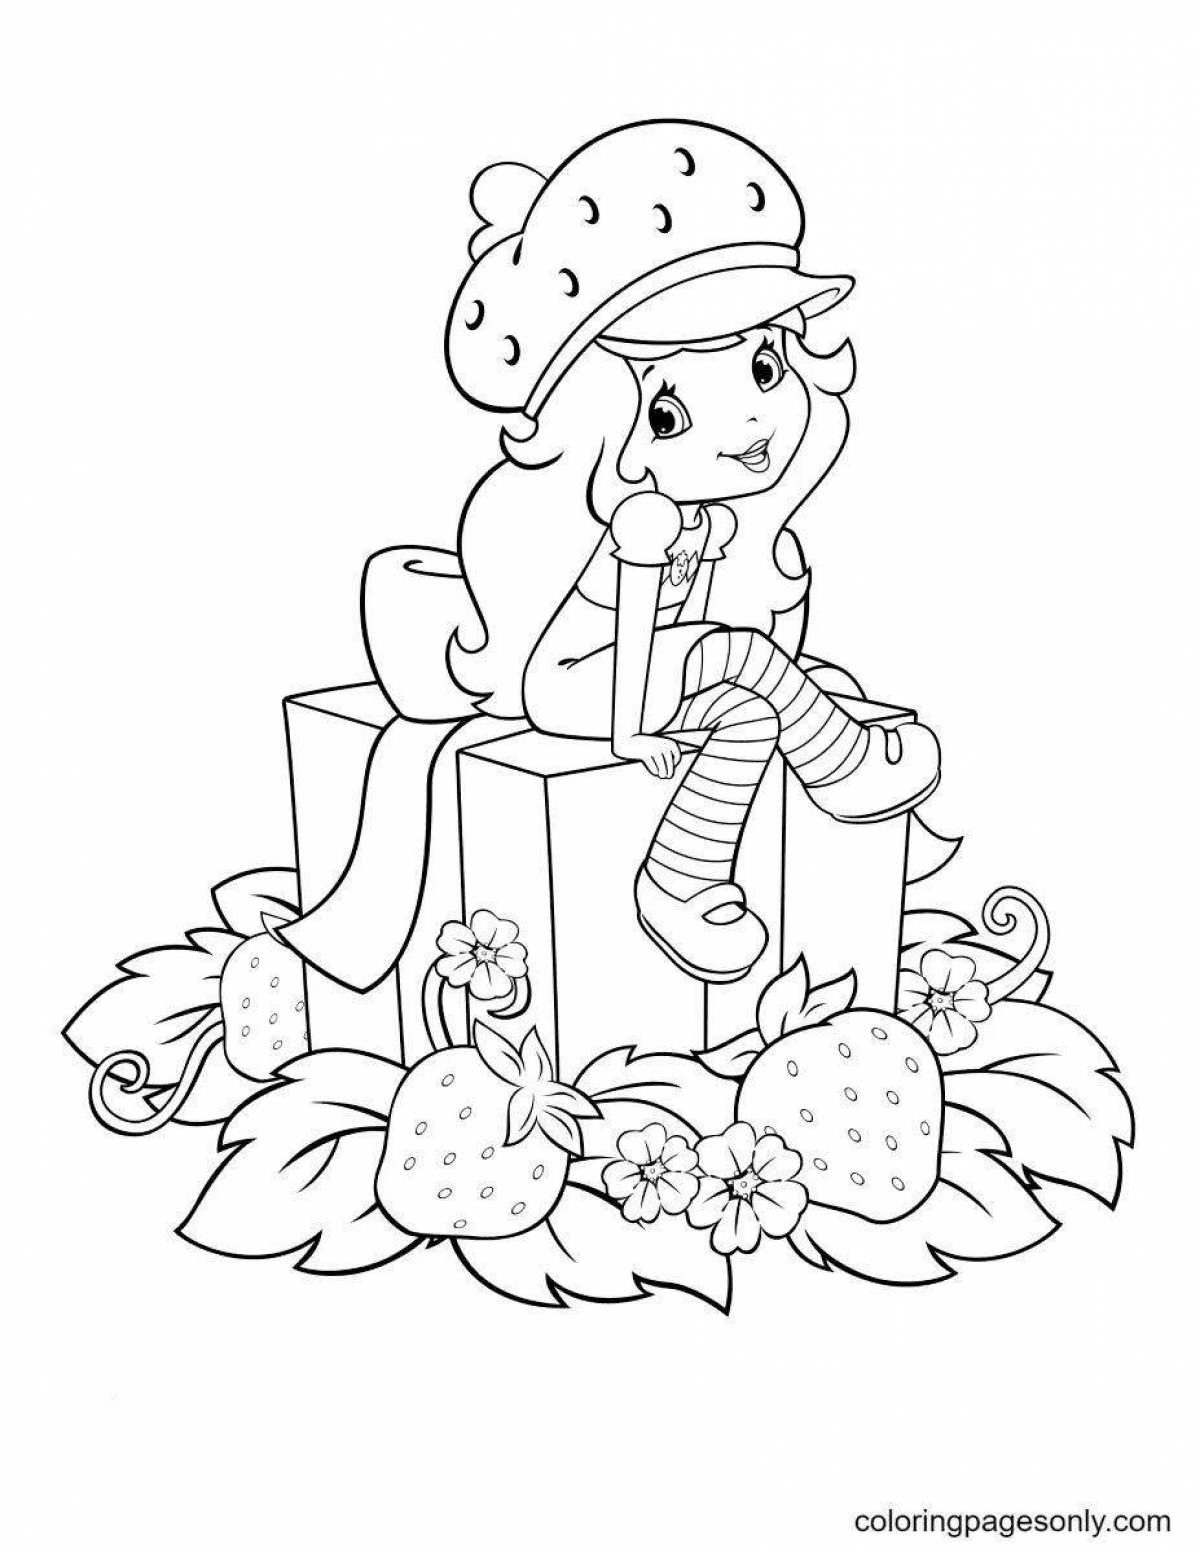 Amazing strawberry coloring page